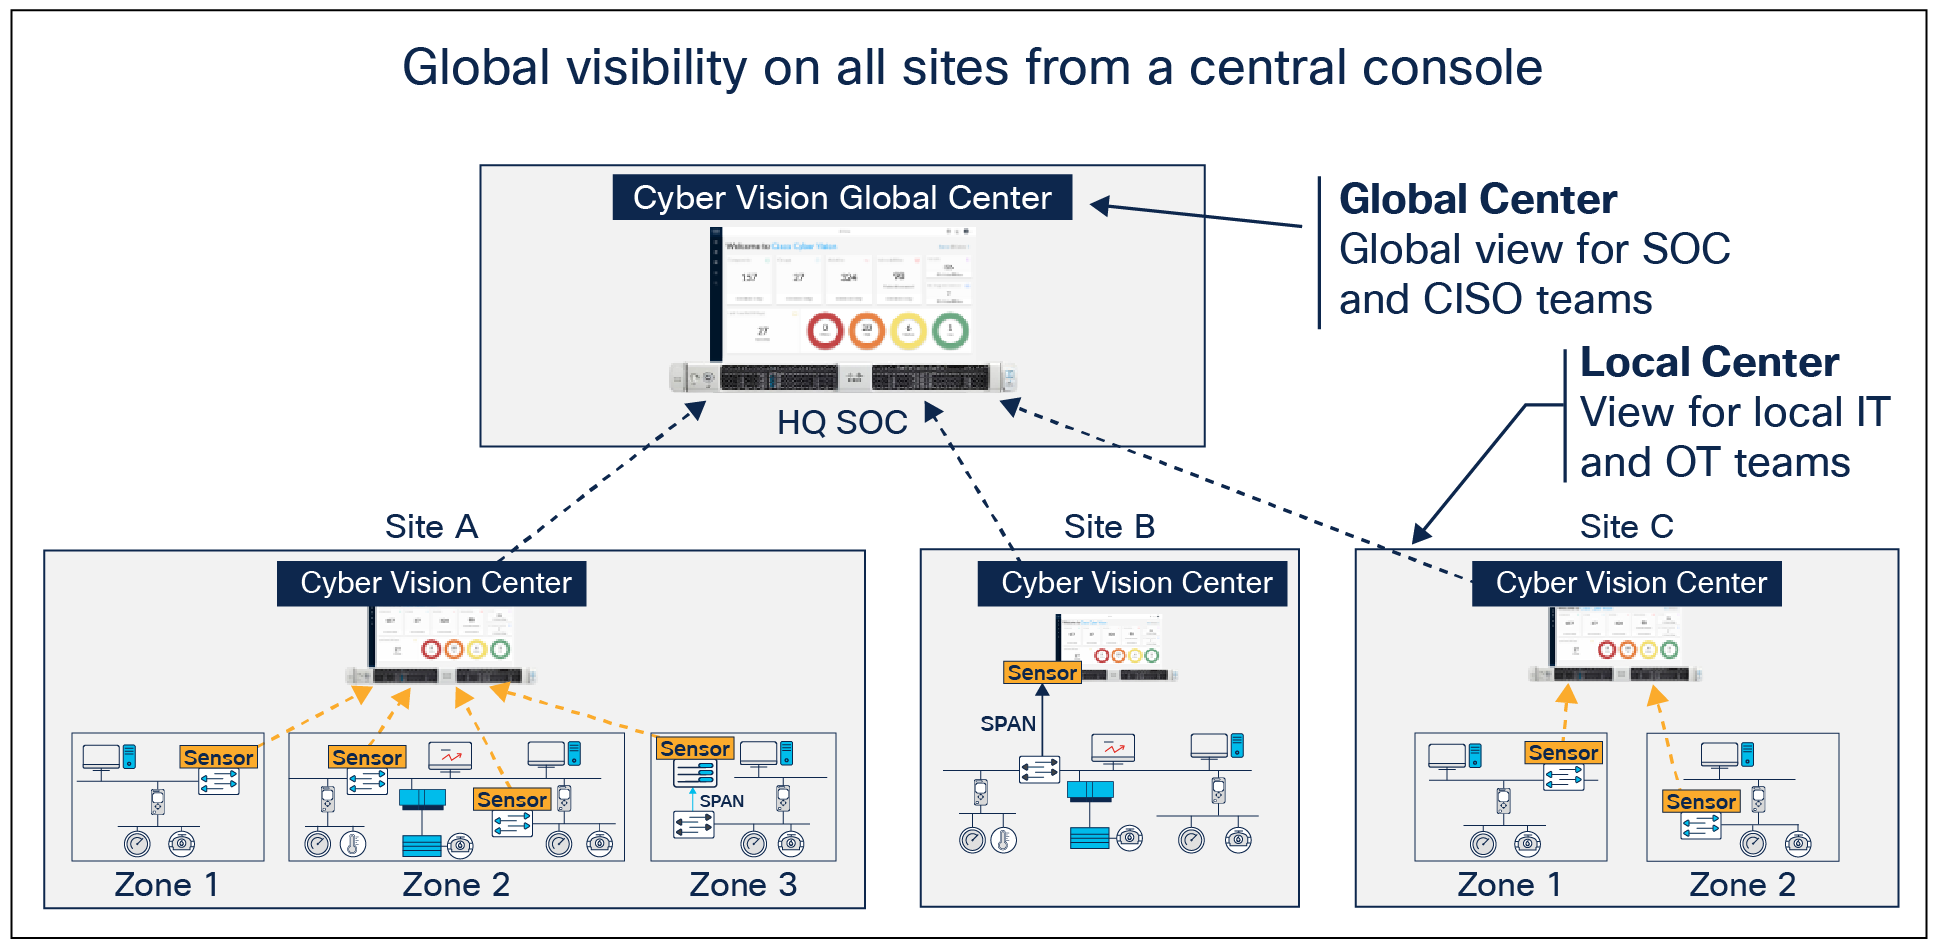 Cyber Vision leverages a nonintrusive edge architecture to offer detailed information to local and global stakeholders